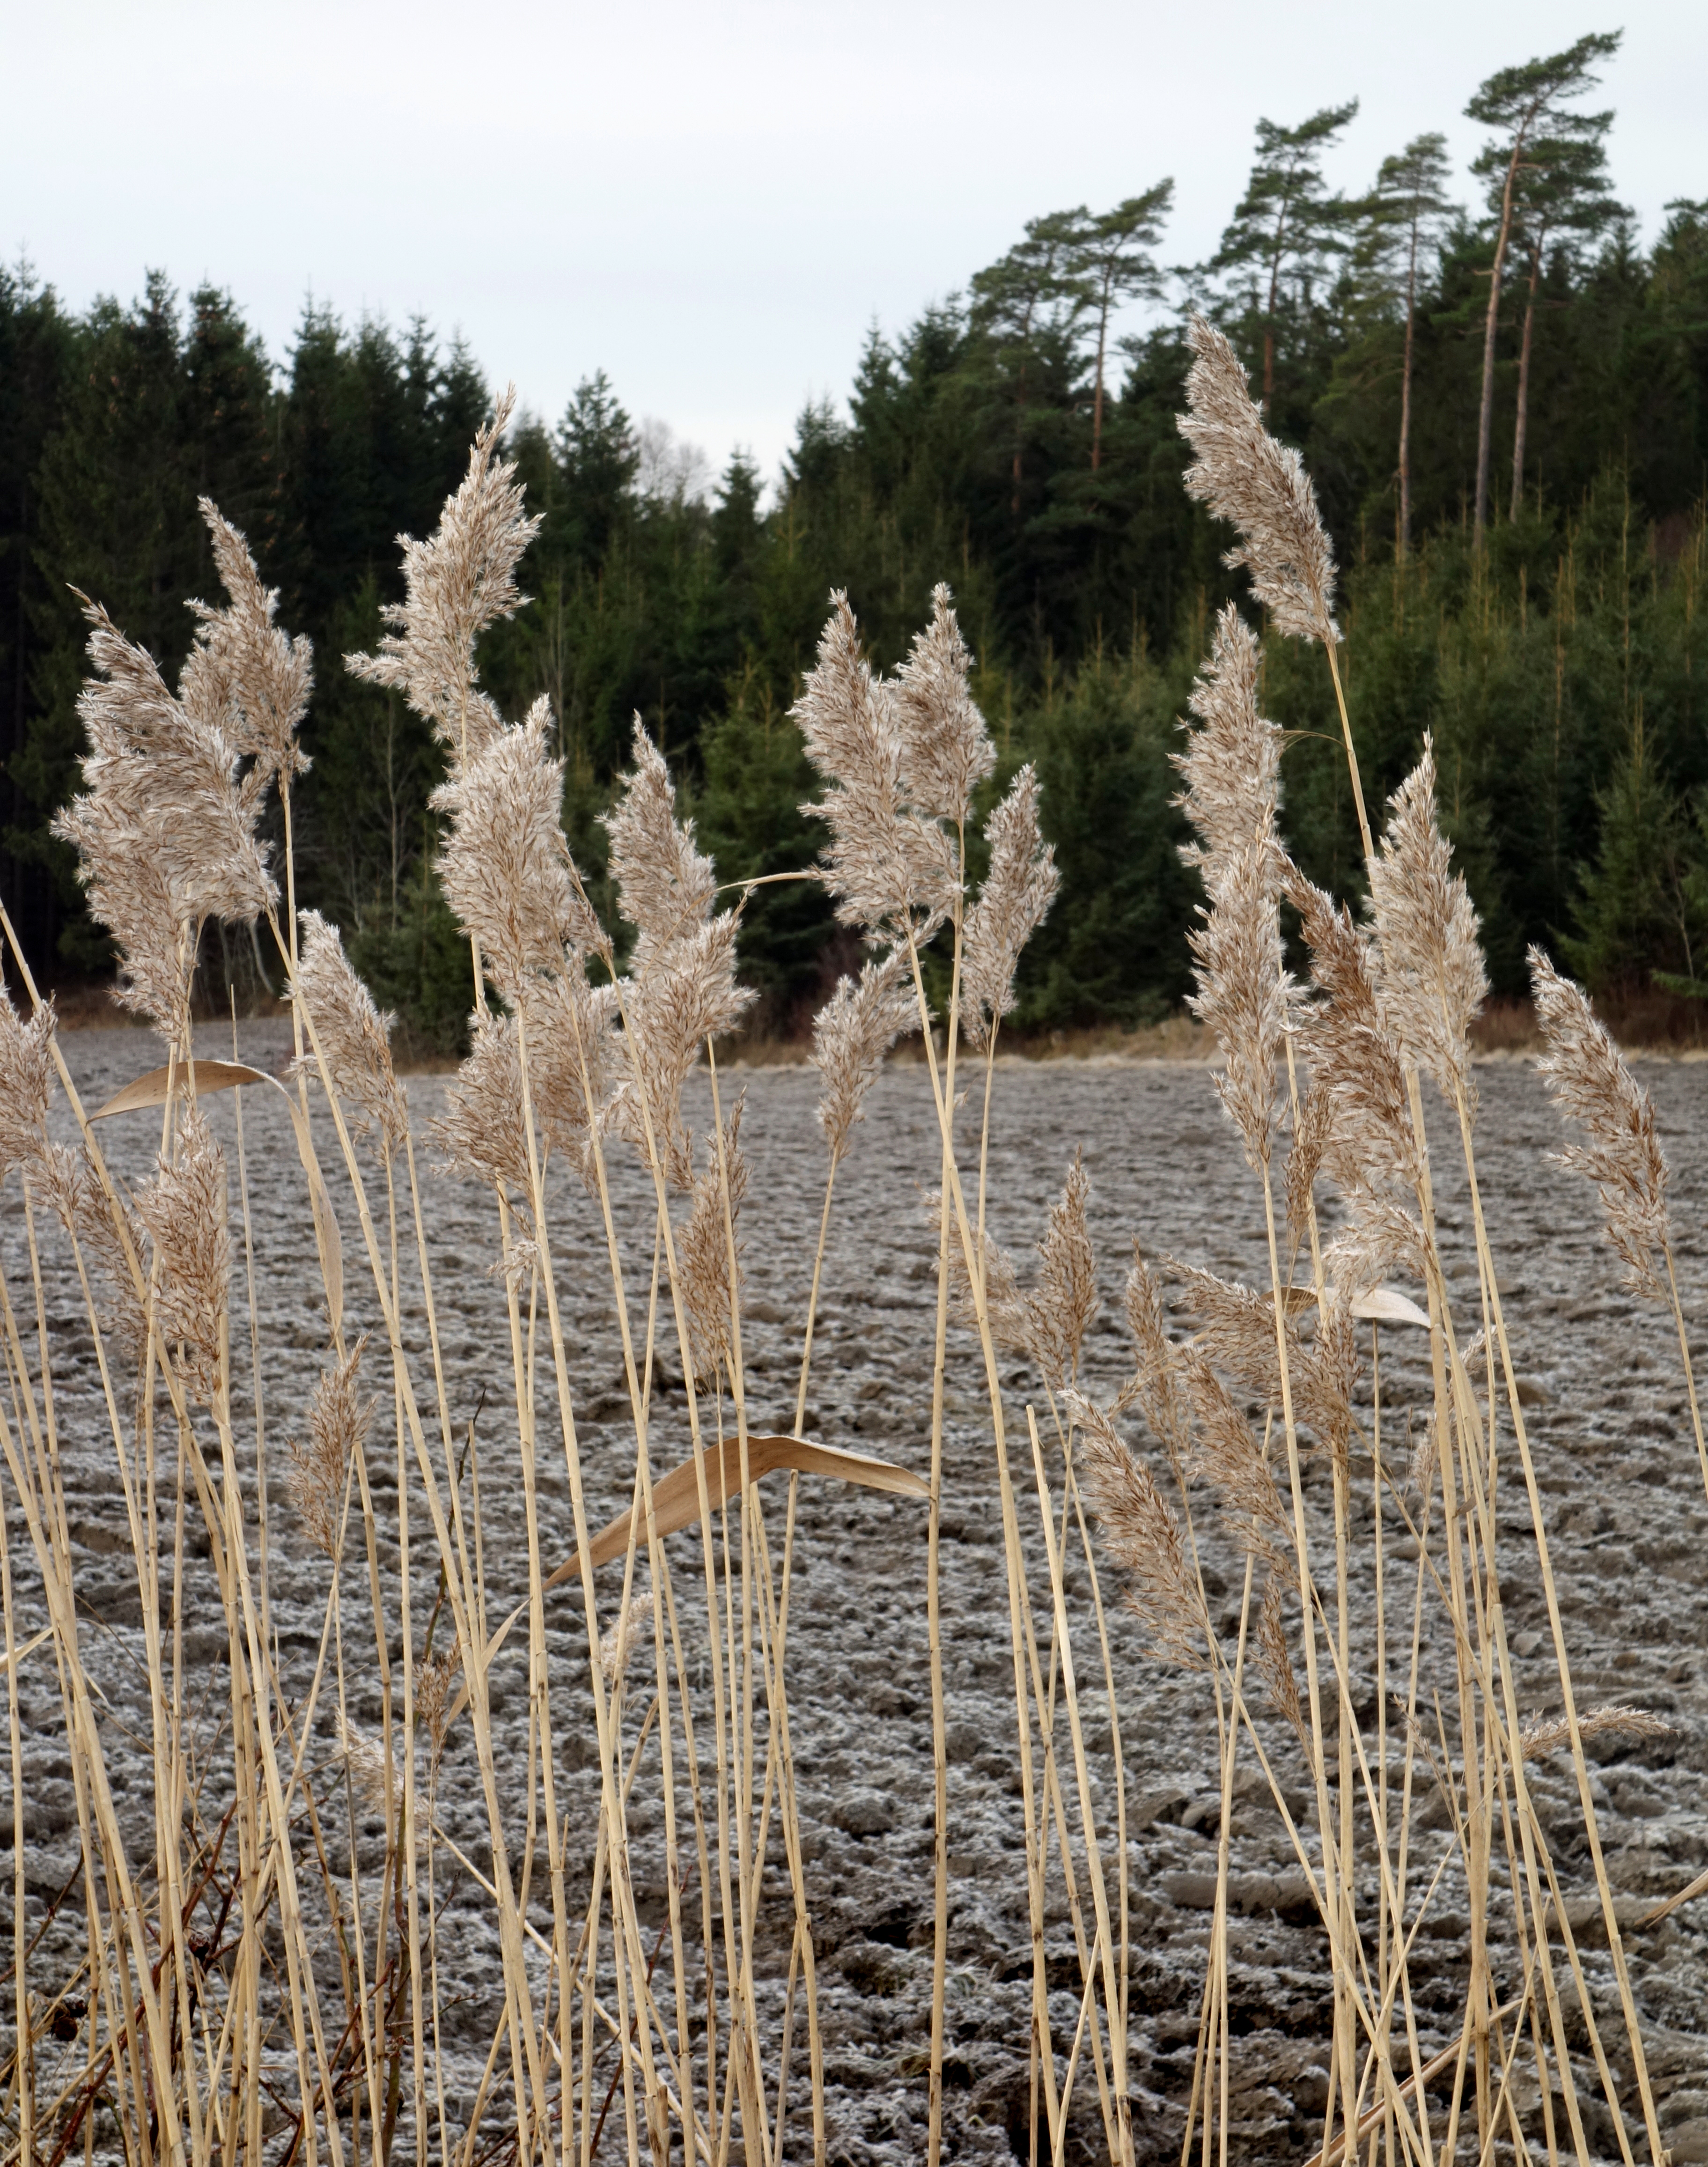 Reeds by a frozen newly ploughed field